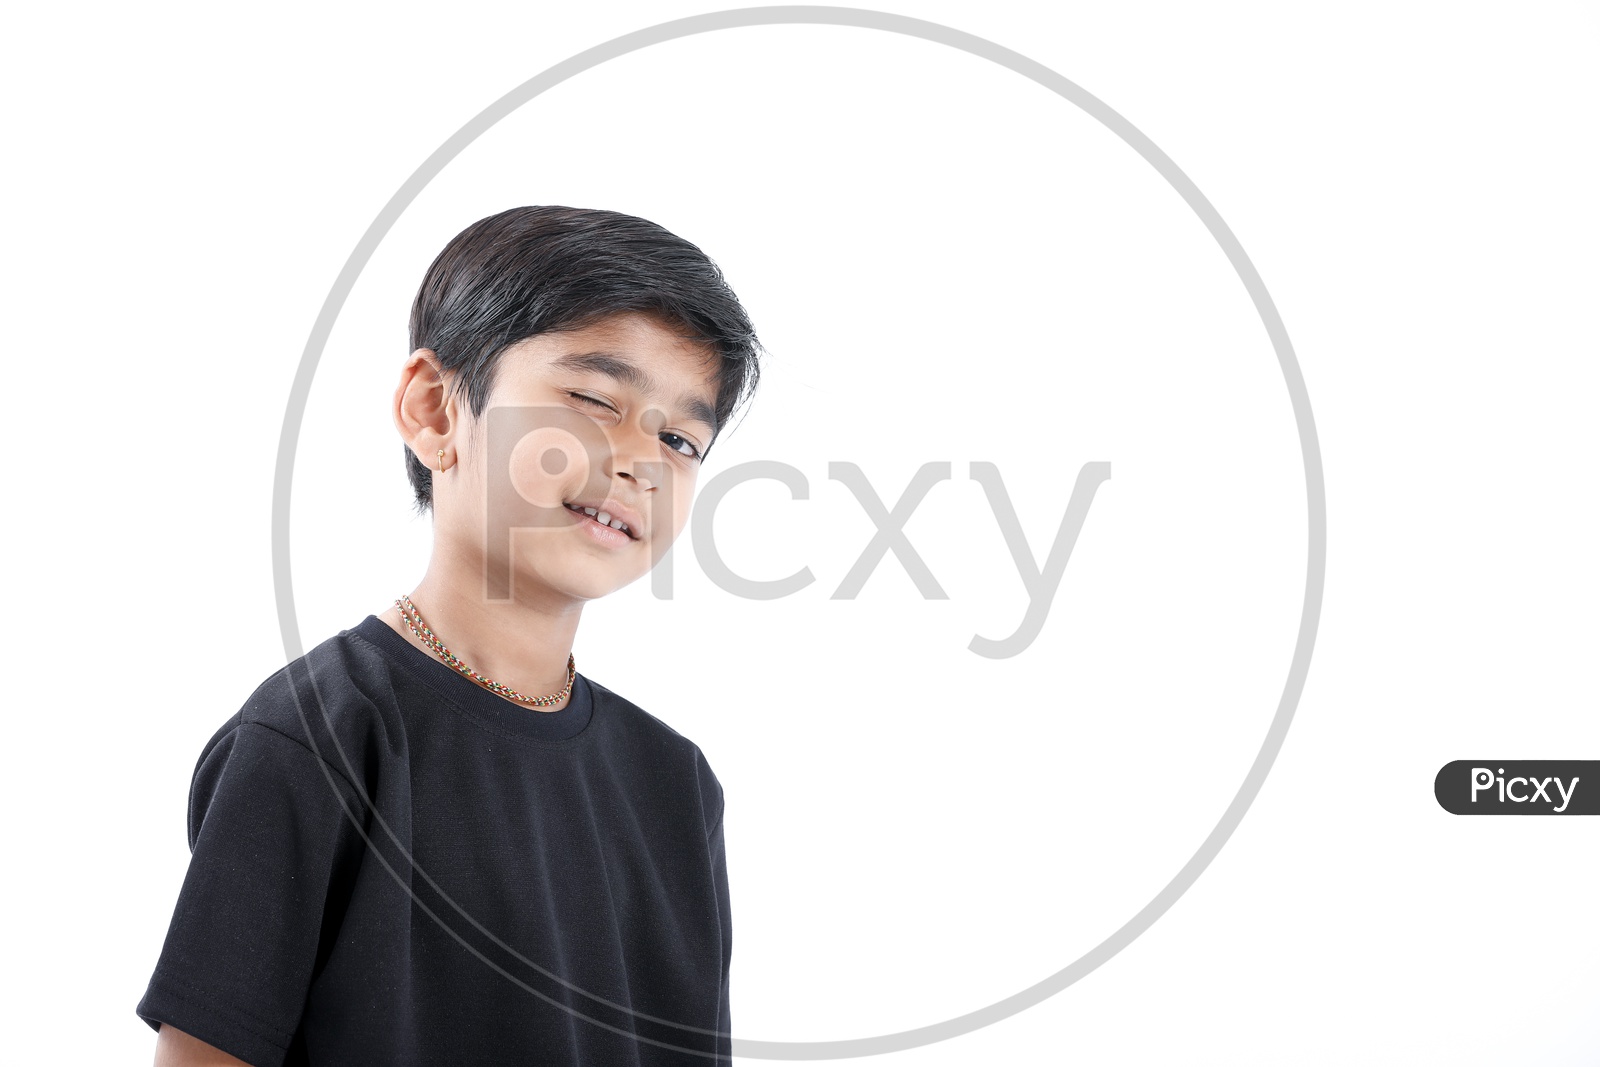 Indian Cute Little Boy Or Asian Kid   With Expressions On Face On an Isolated White Background